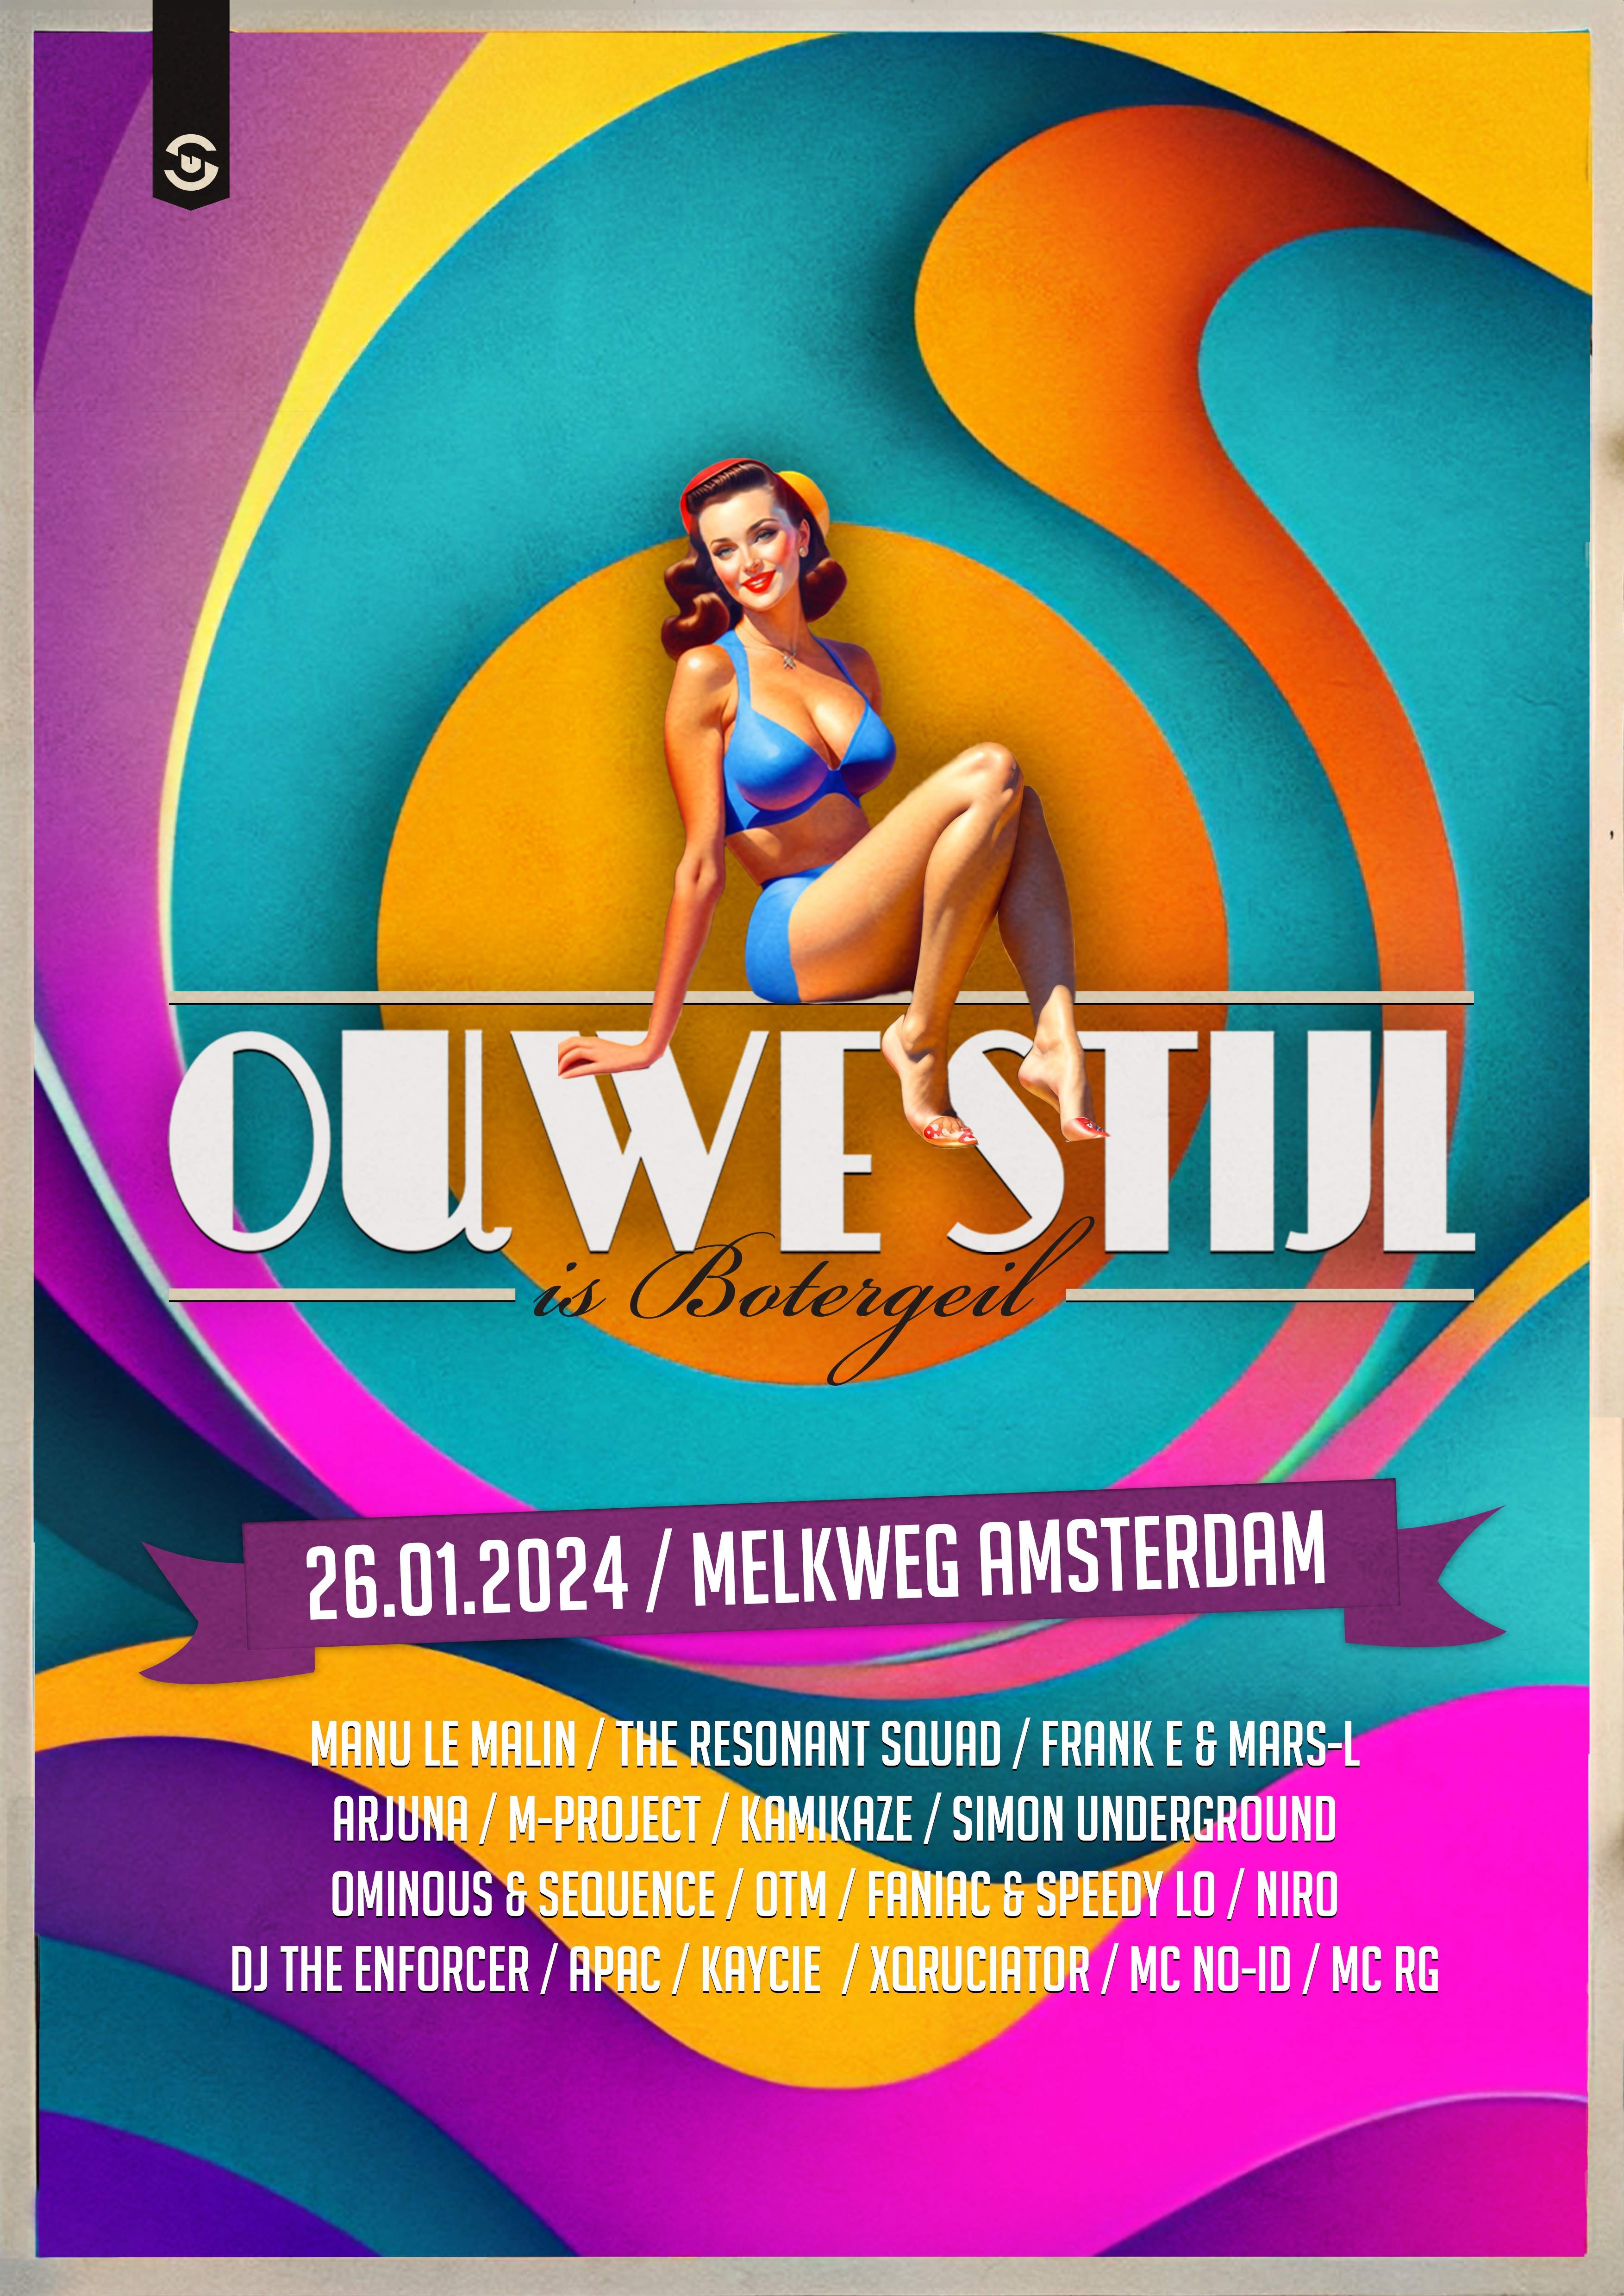 Ouwe Stijl Is Botergeil - フライヤー表